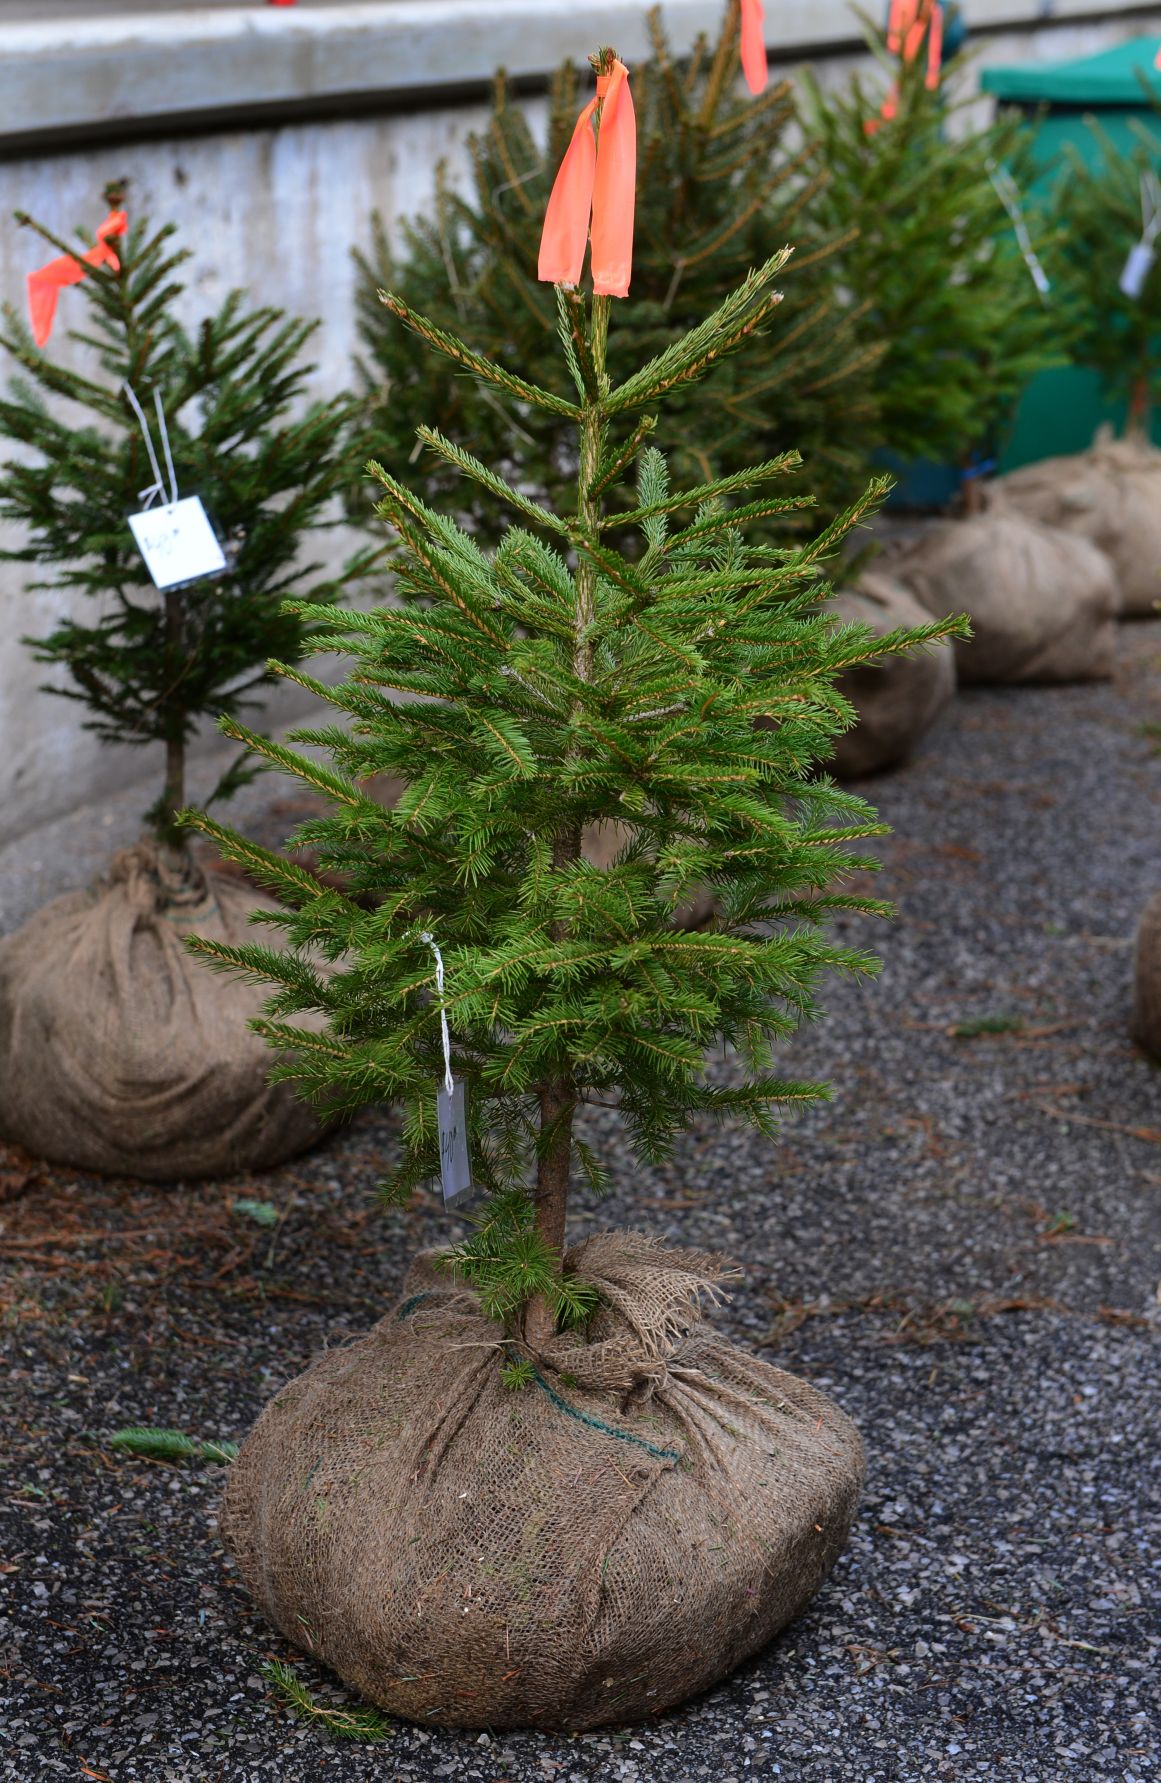 Put down roots this year with a sustainable Christmas tree | Life | wvgazettemail.com